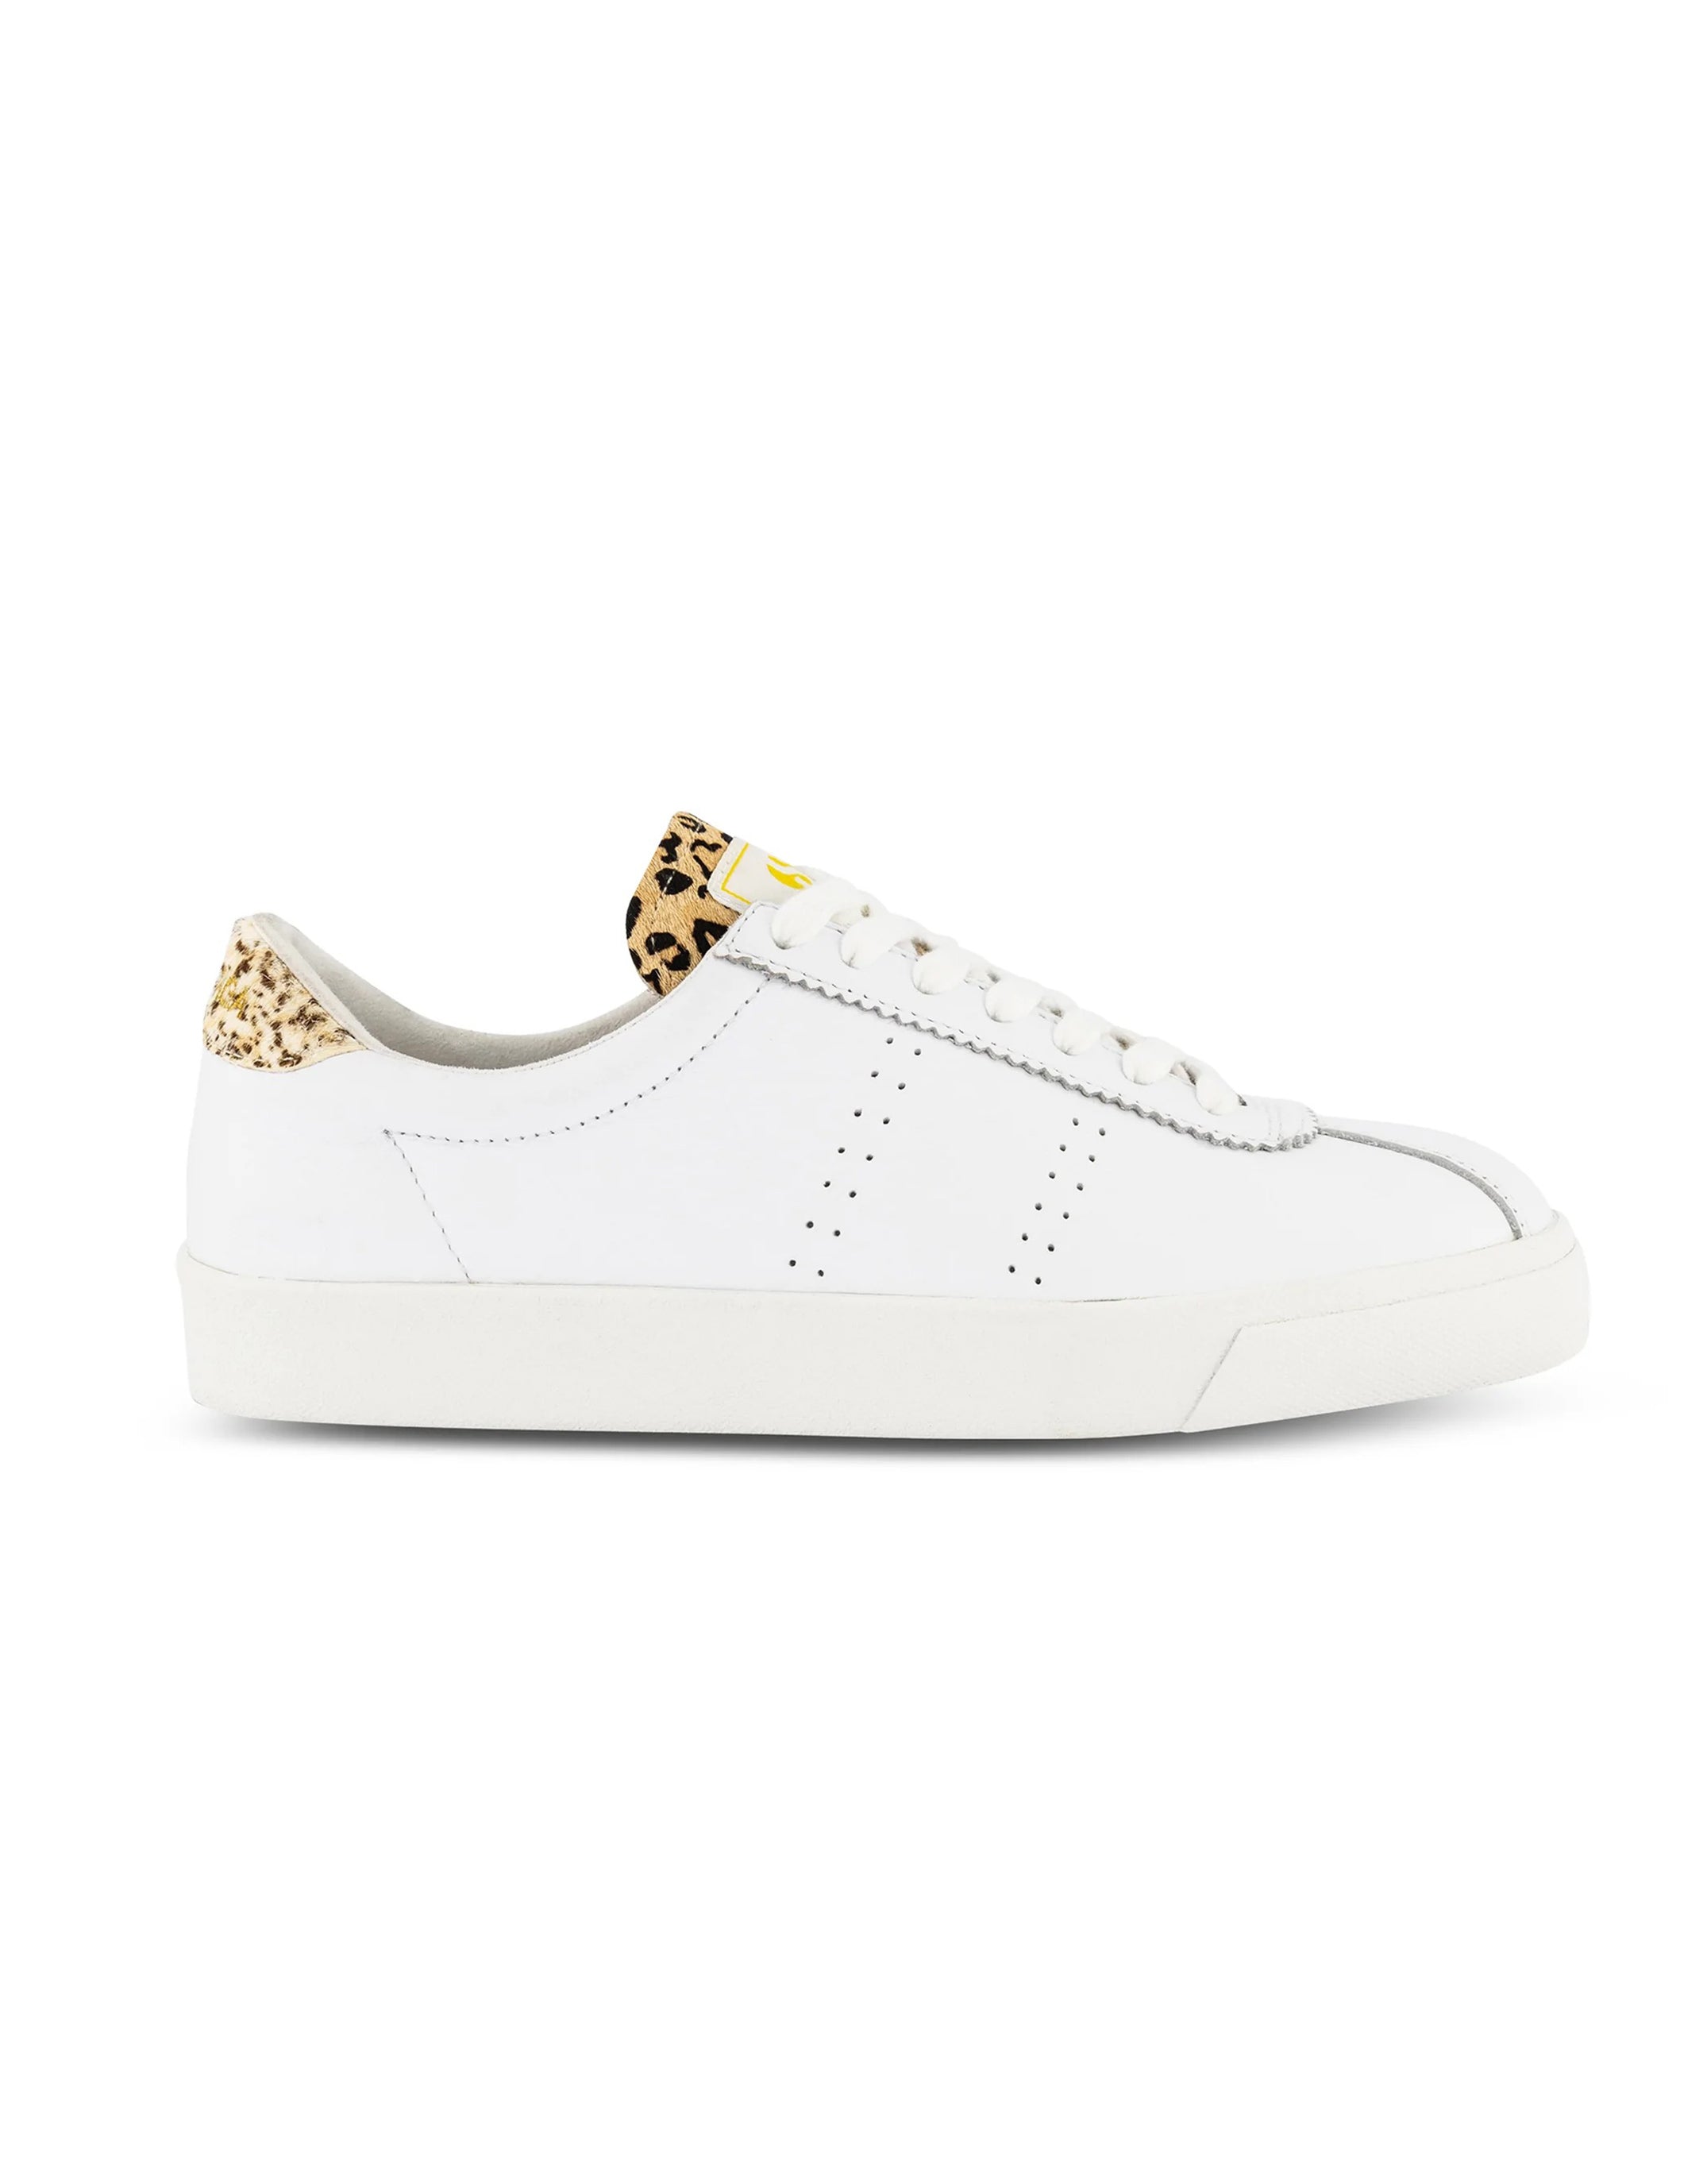 Superga Leather Sneakers | 2843 Club S Calfhair Details Sneaker - White/Spots Leopard